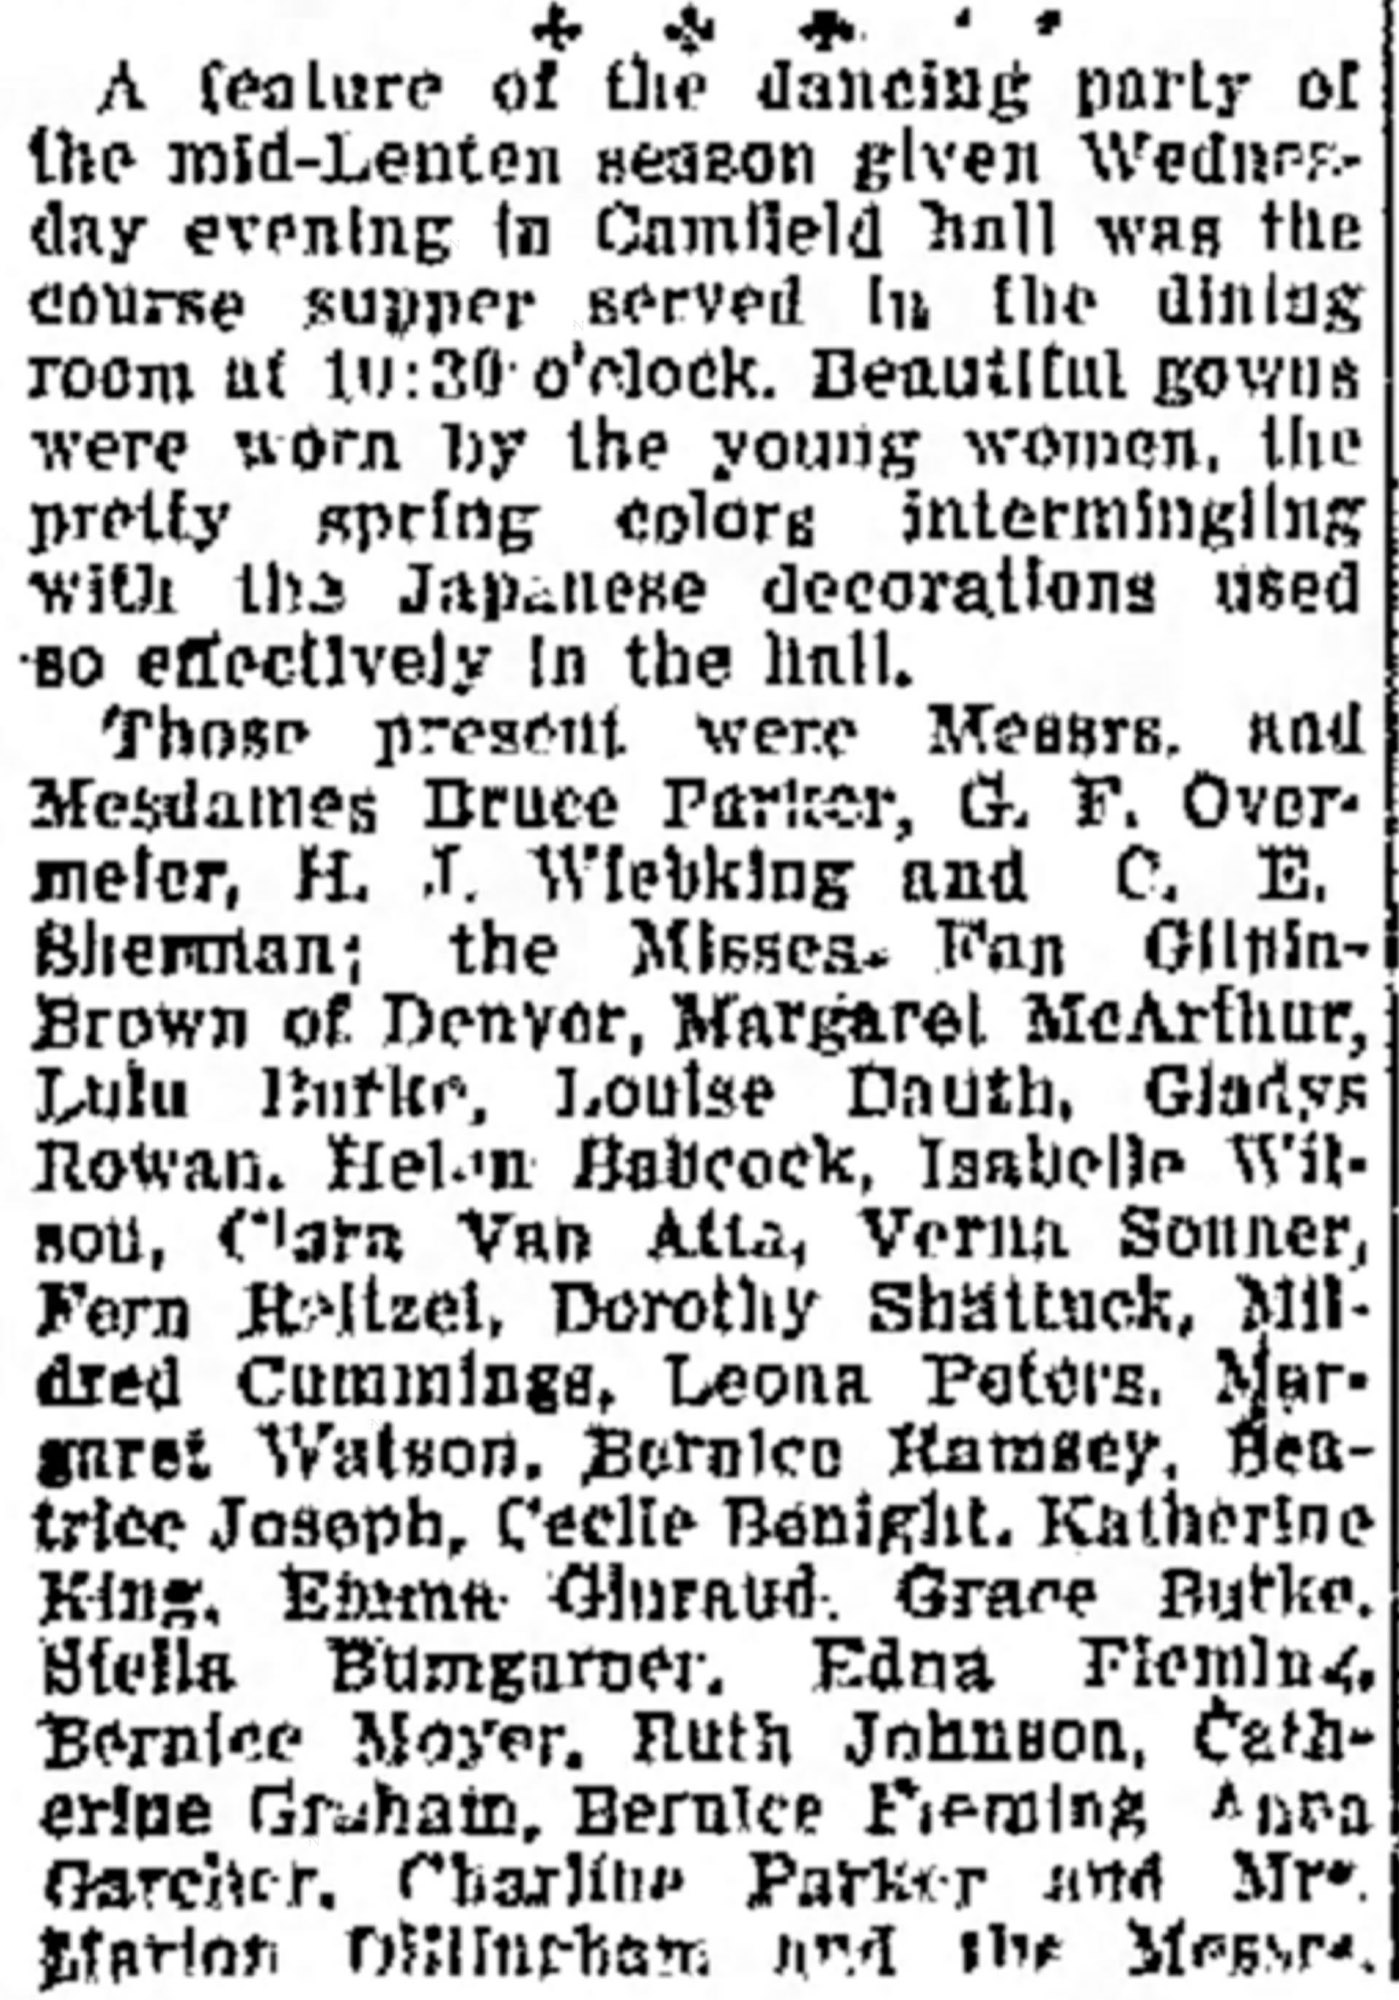 Dauth Family Archive - 1916-03-23 - Greeley Daily Tribune - Louise Dauth At Dancing Party